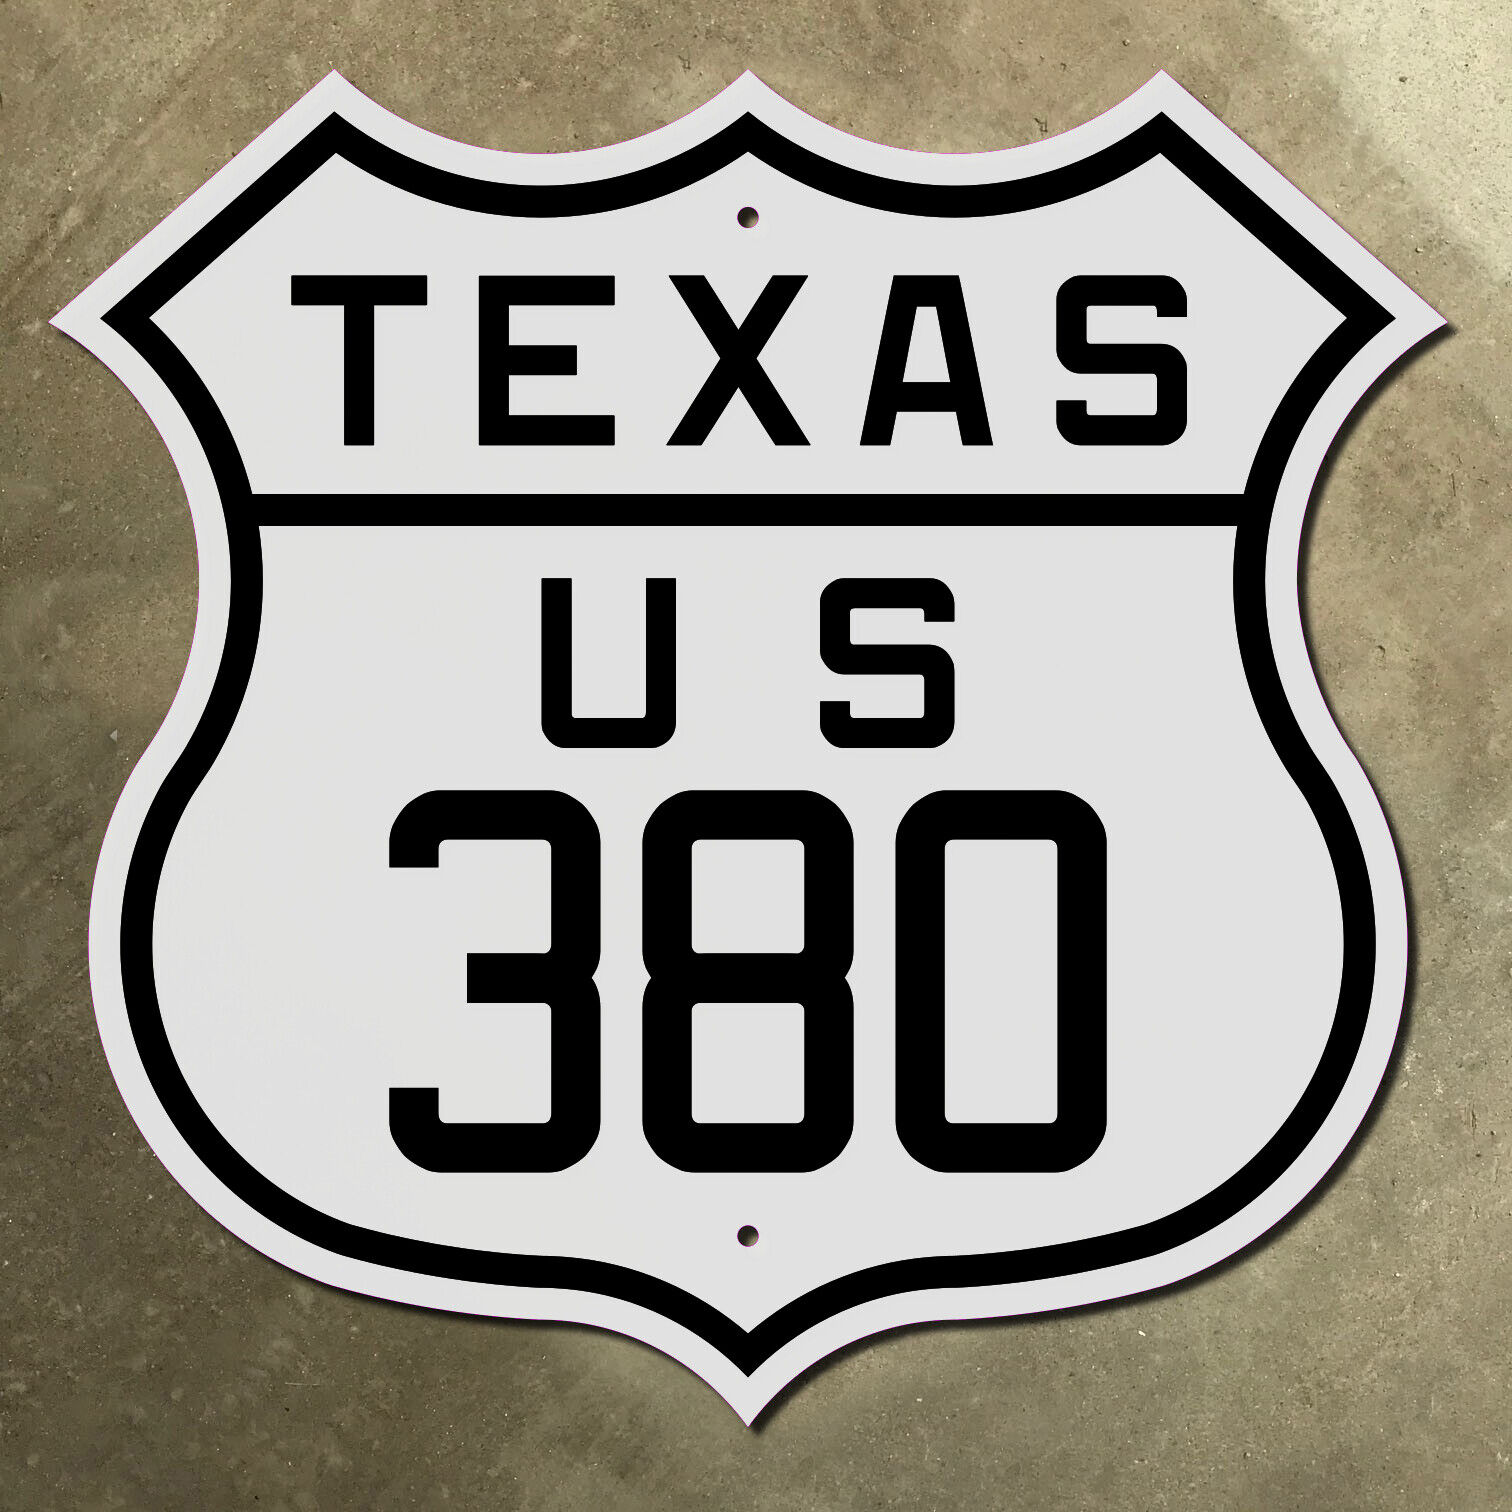 Texas US highway 380 Brownfield Graham Frisco route shield 1926 road sign 16x16